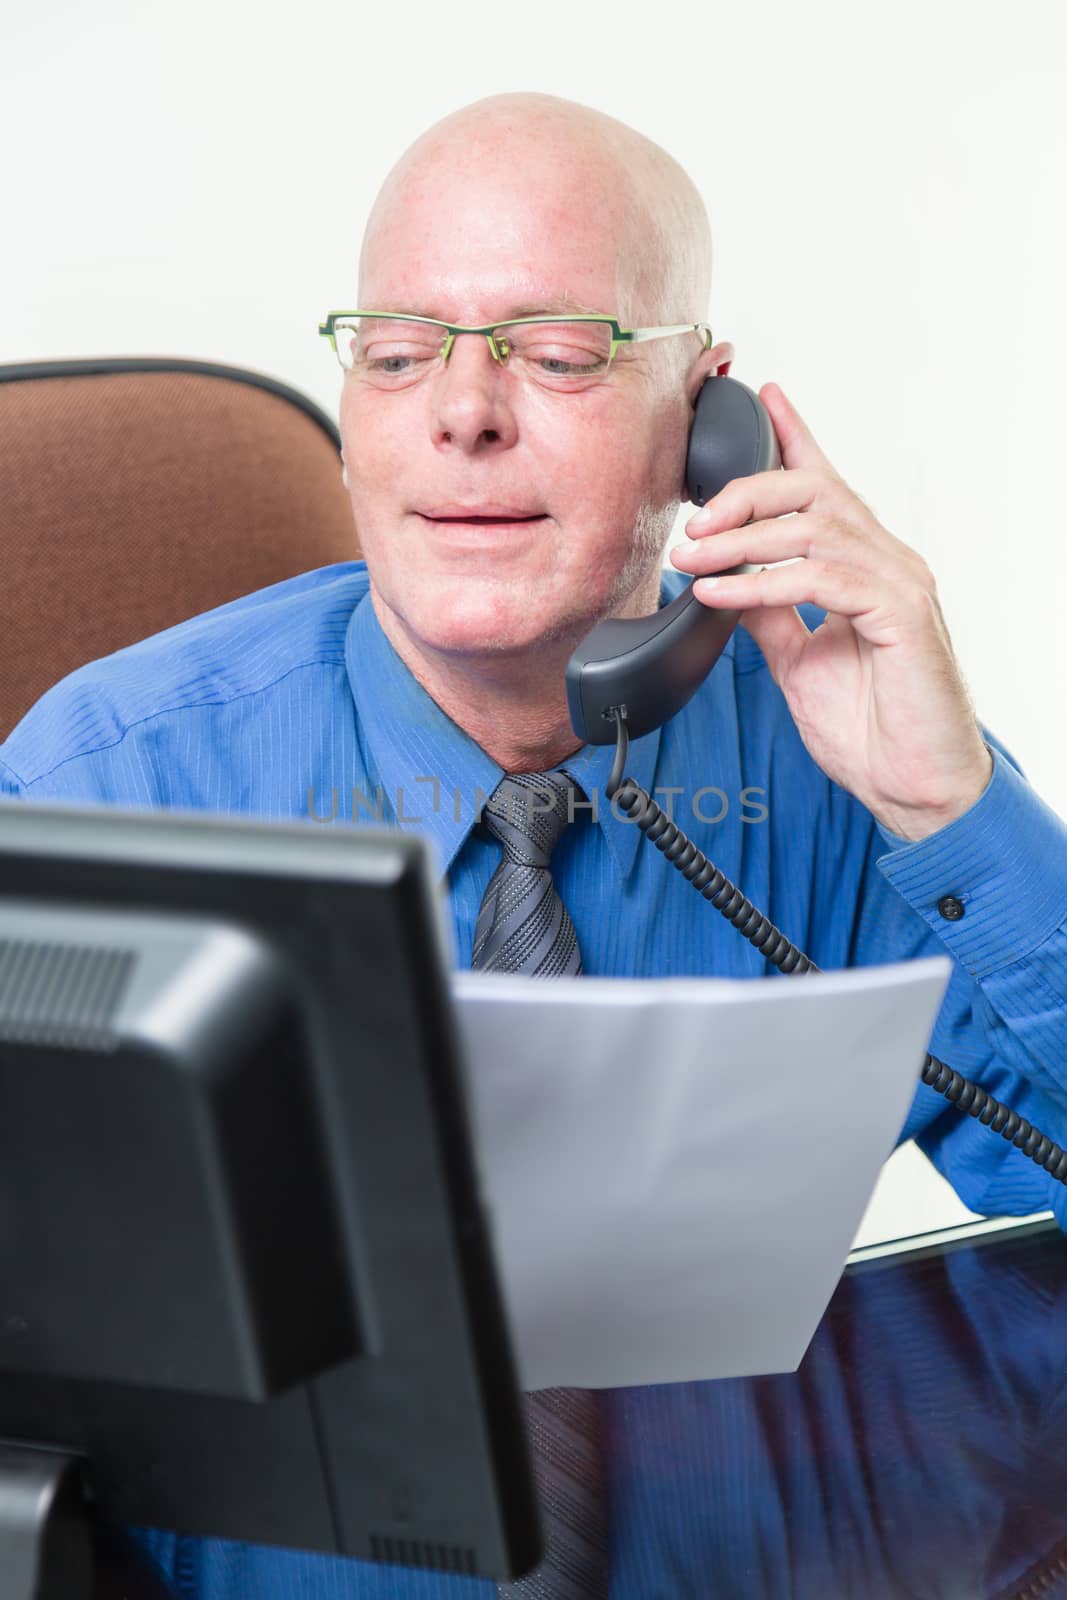 Corporate worker at desk comparing written notes with computer data